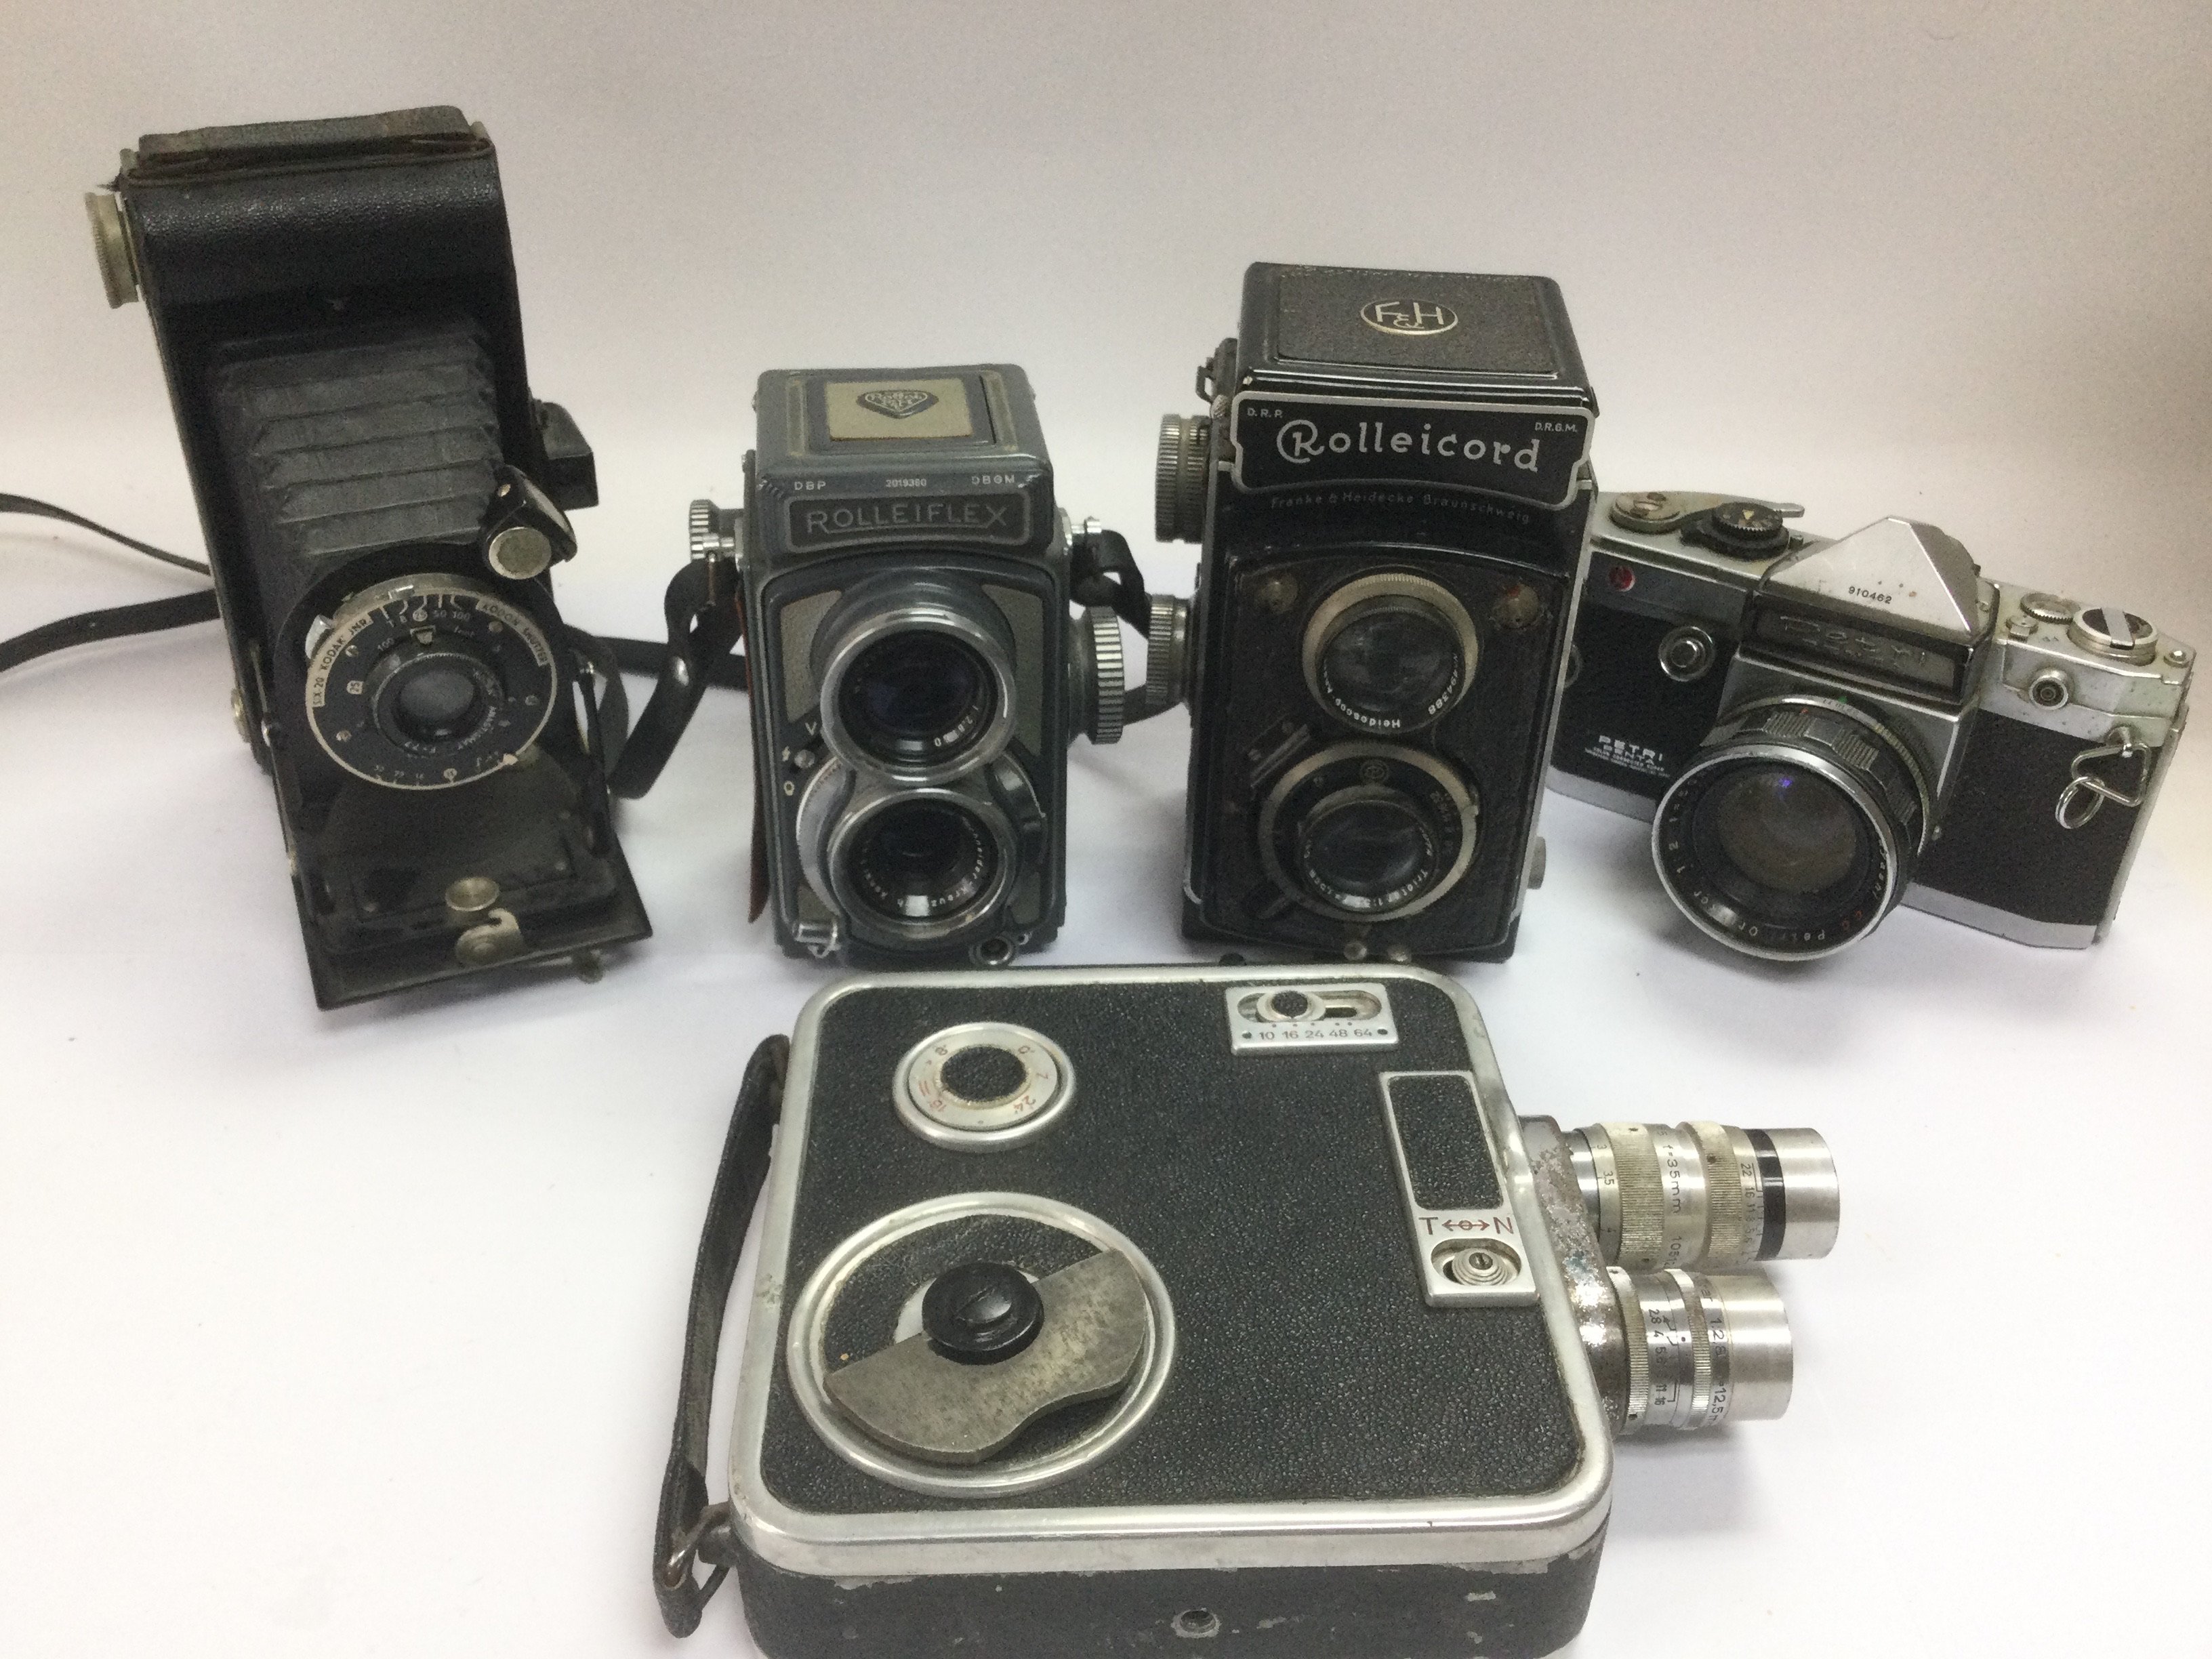 A box of vintage cameras including a Rolleiflex, Rolleicord, Kodak Six 20 and others. Shipping